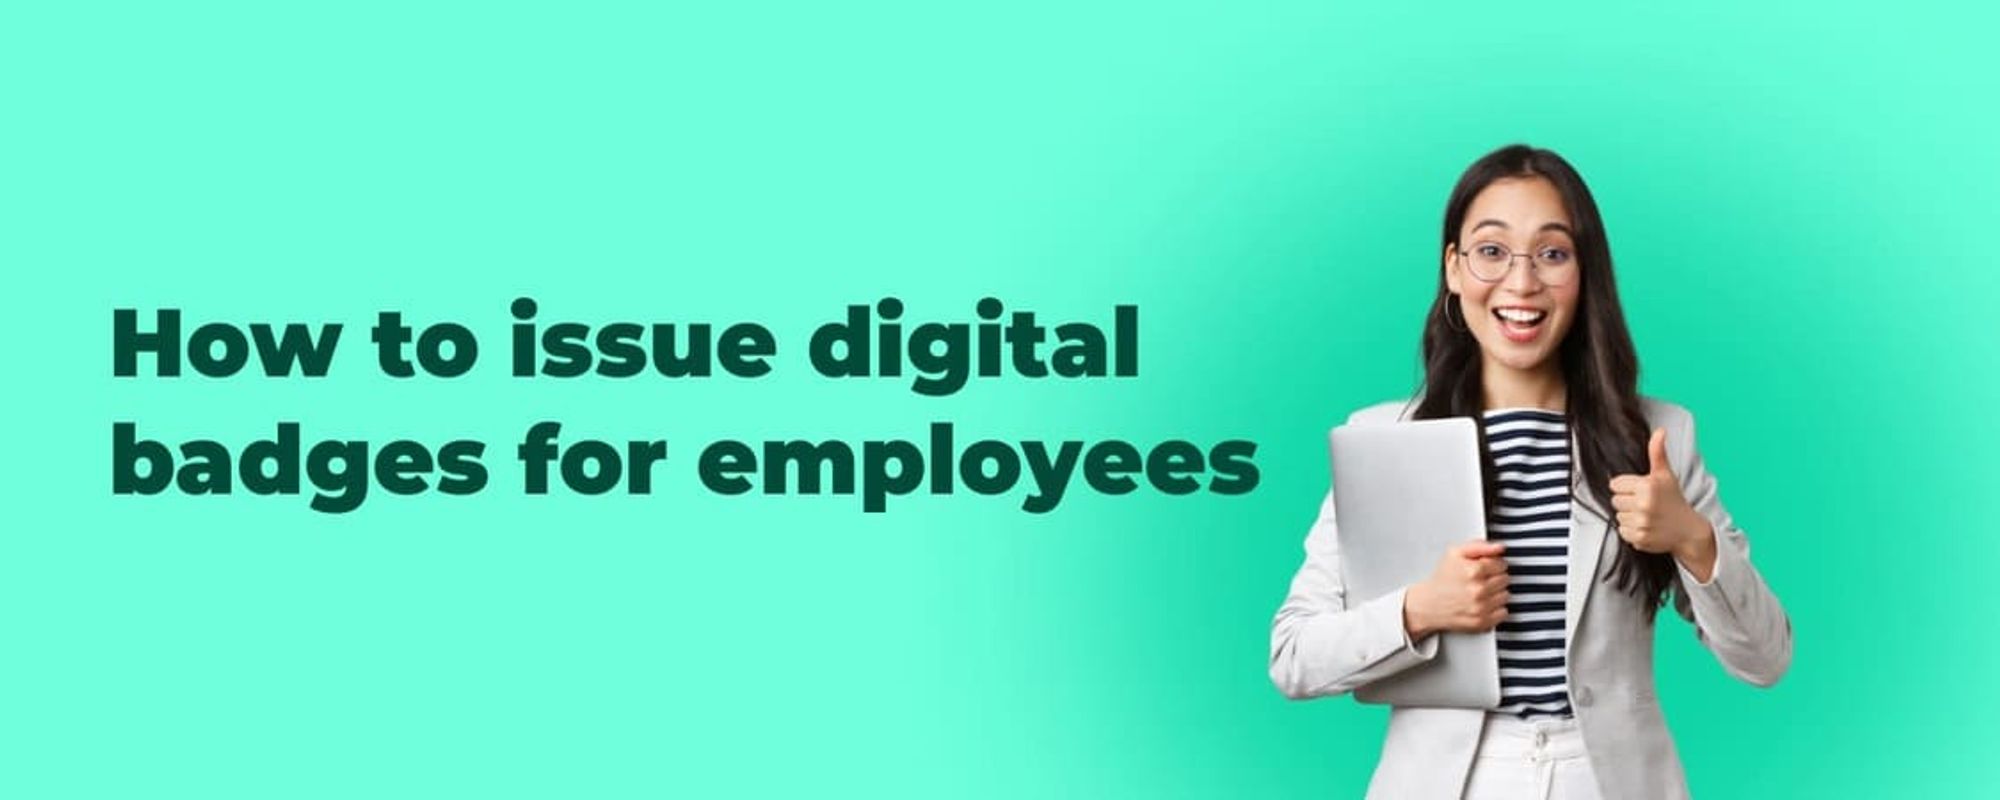 How to issue digital badges for employees